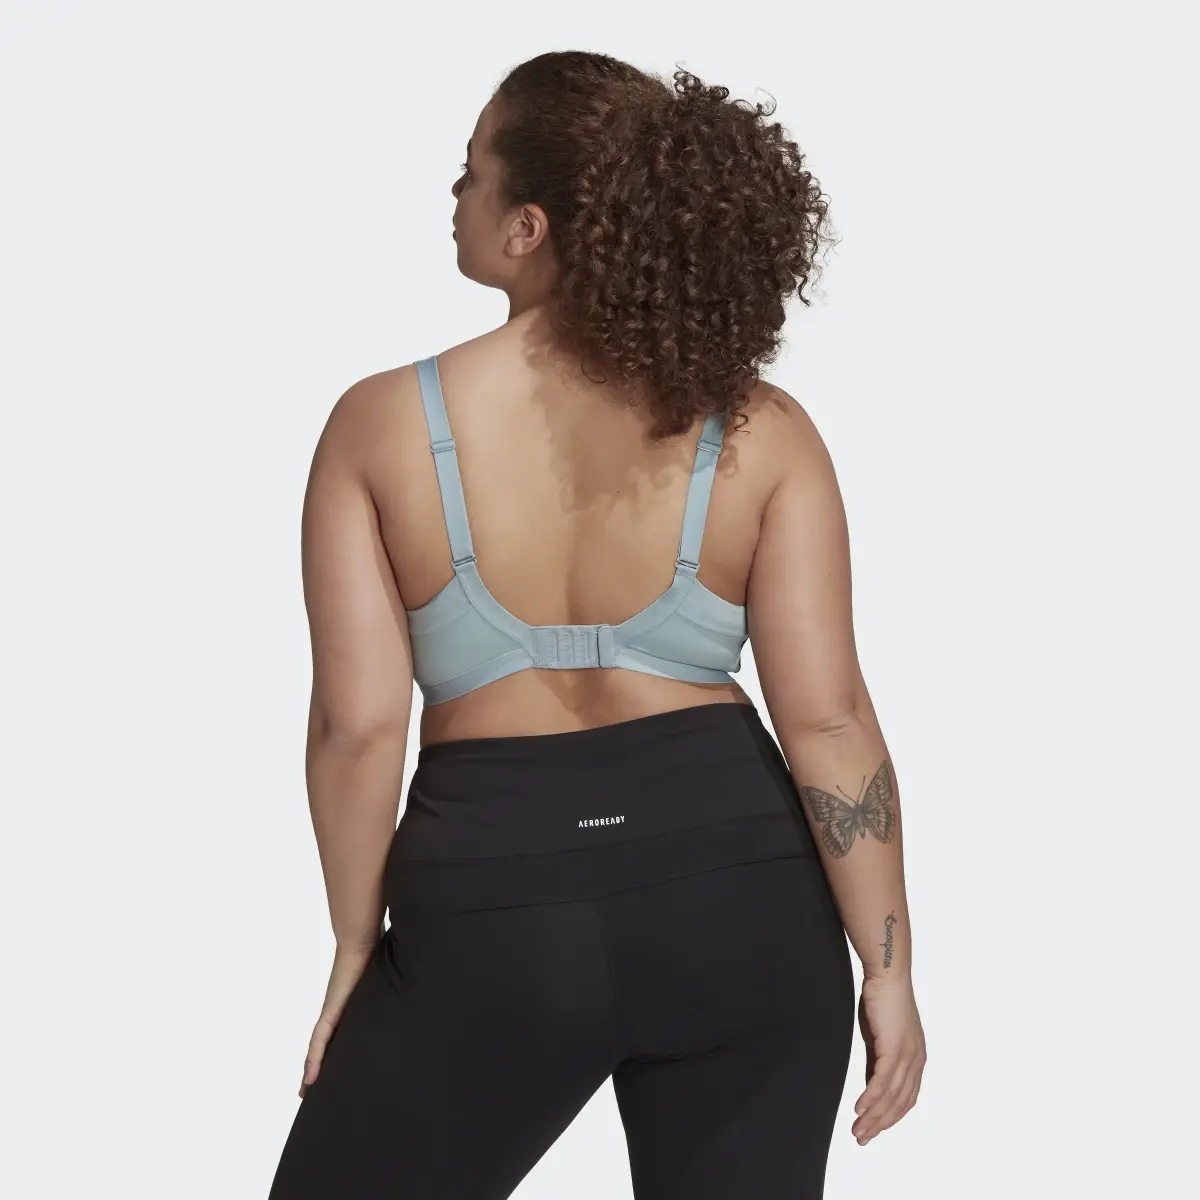 Adidas TLRD Impact Luxe Training High-Support Bra (Plus Size). 3